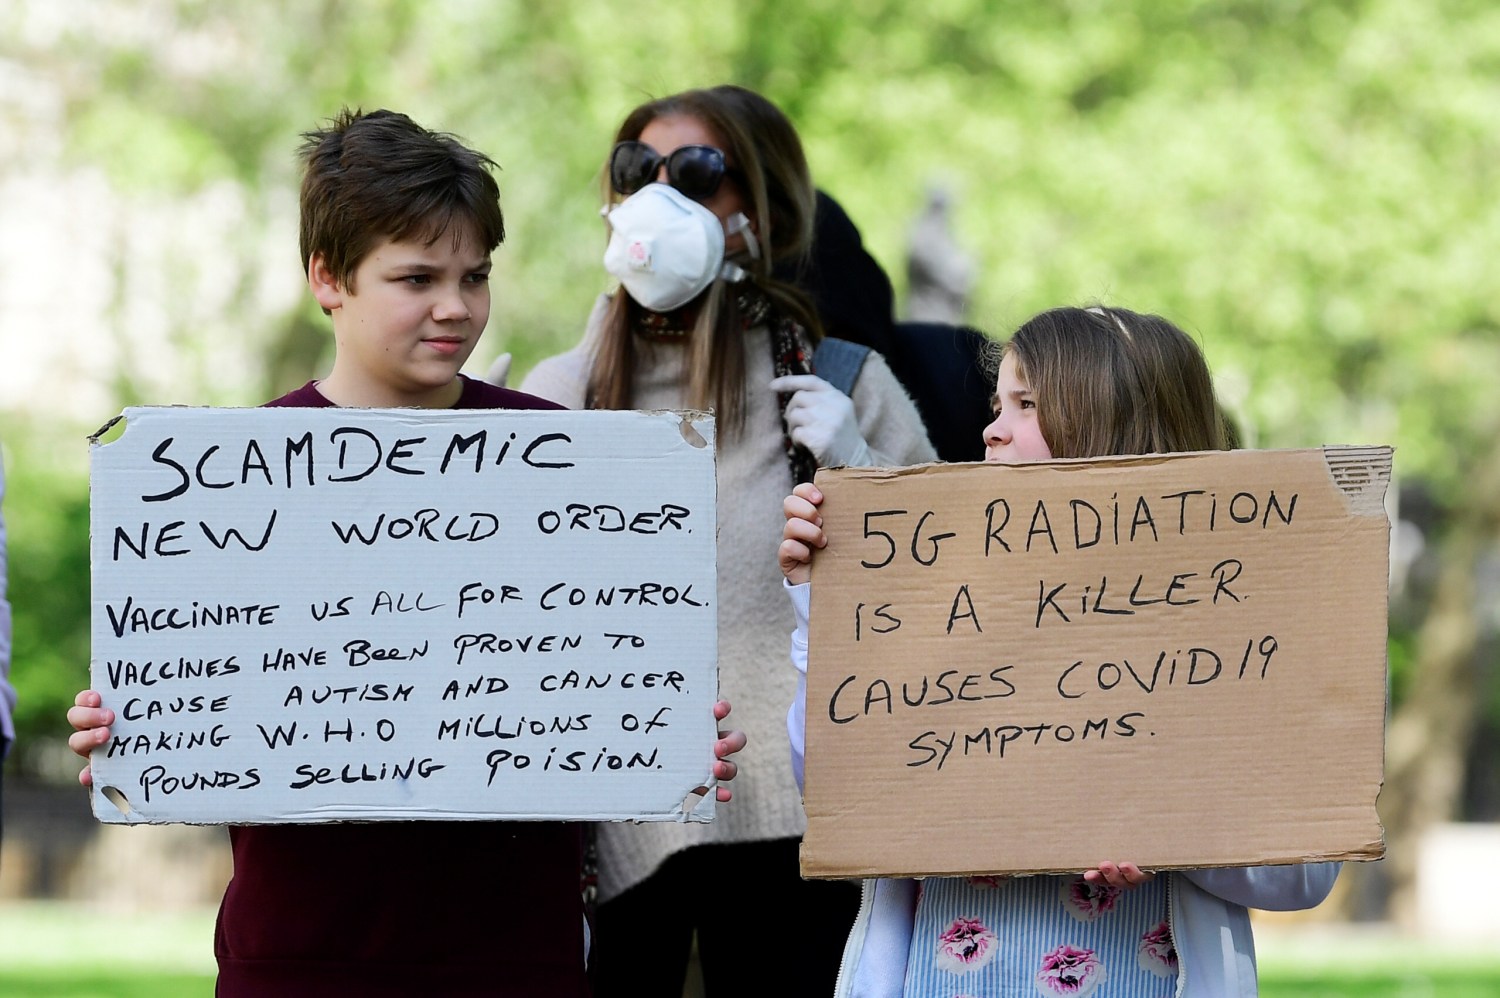 People hold up banners in protest against lockdown and vaccination outside New Scotland Yard police headquarters, following the outbreak of the coronavirus disease (COVID-19), London, Britain, May 2, 2020. REUTERS/Toby Melville